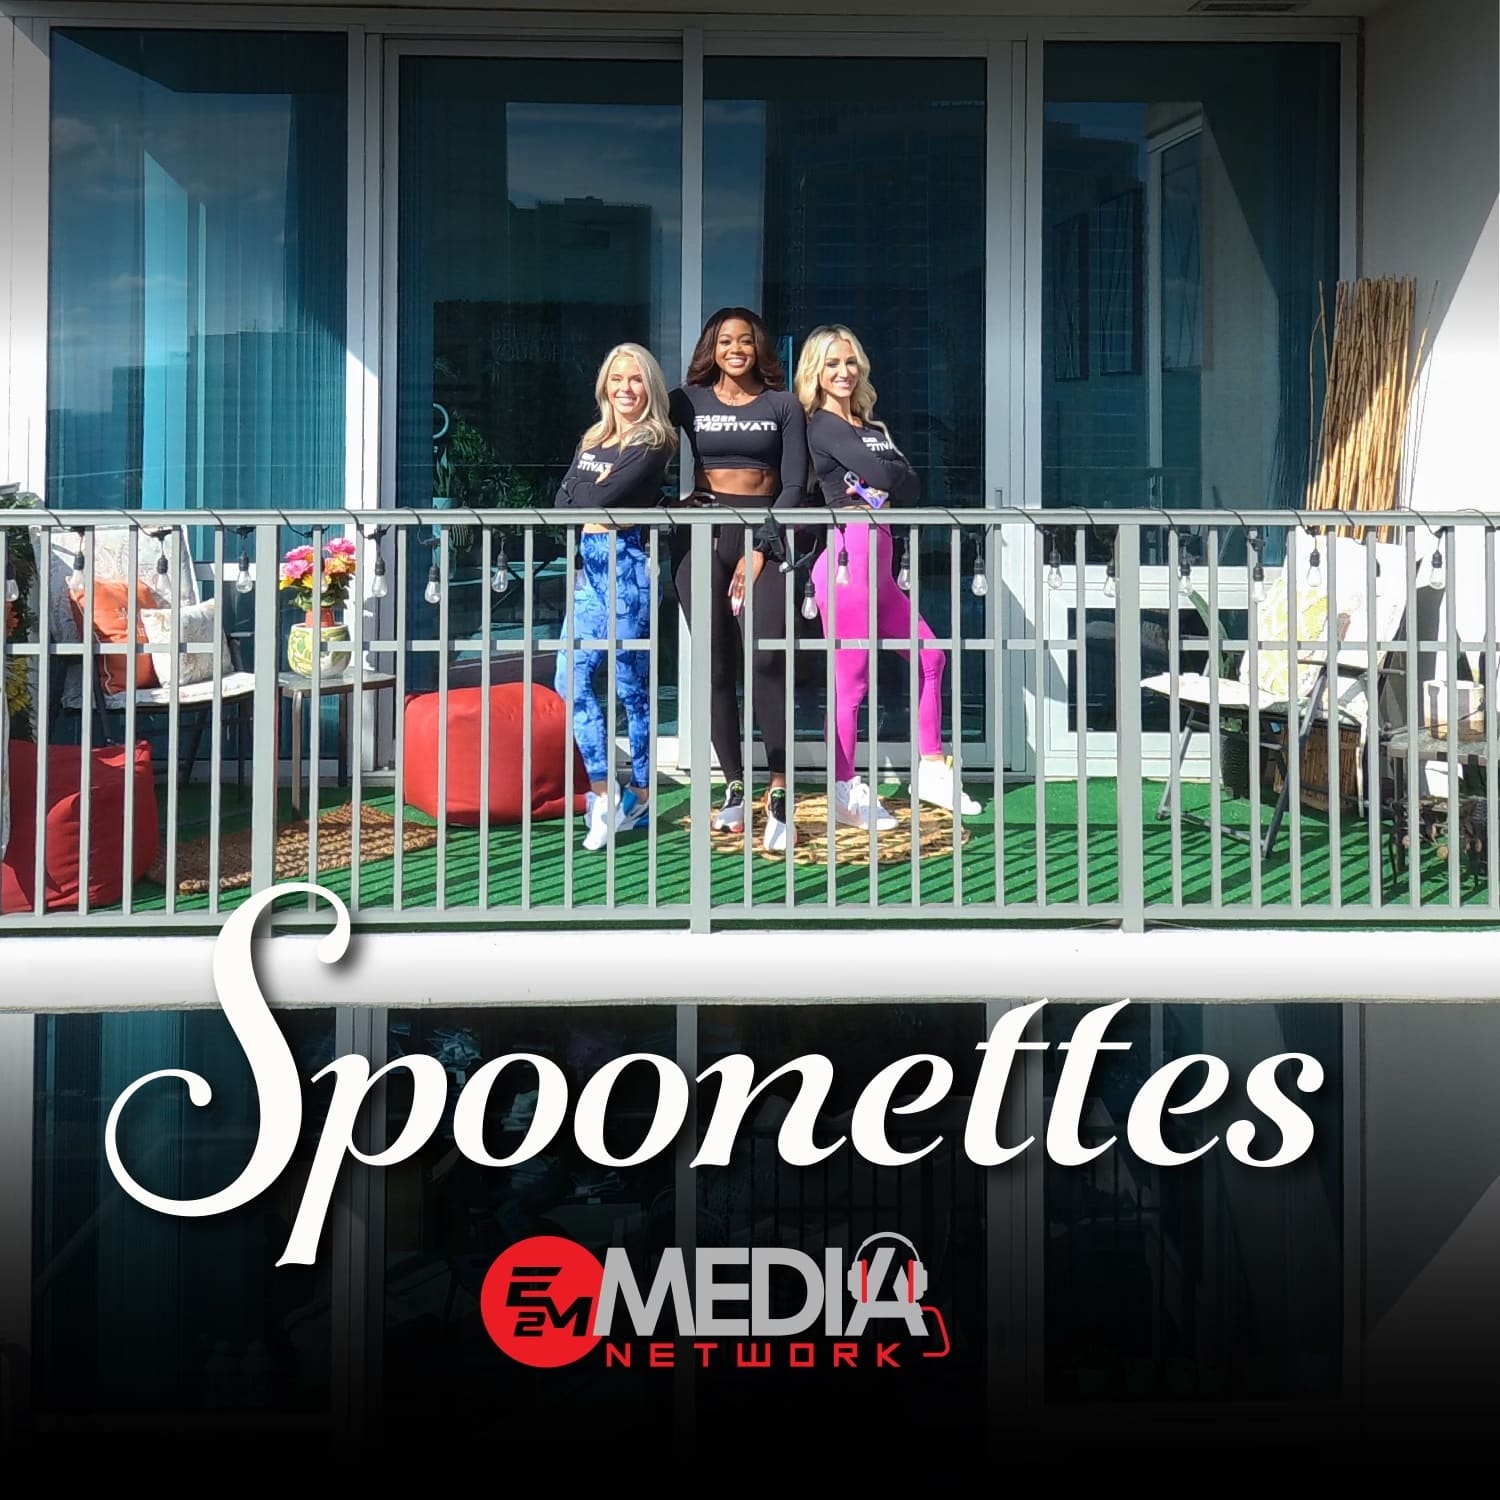 The Spoonettes - Introducing The Spoonettes - Episode 1